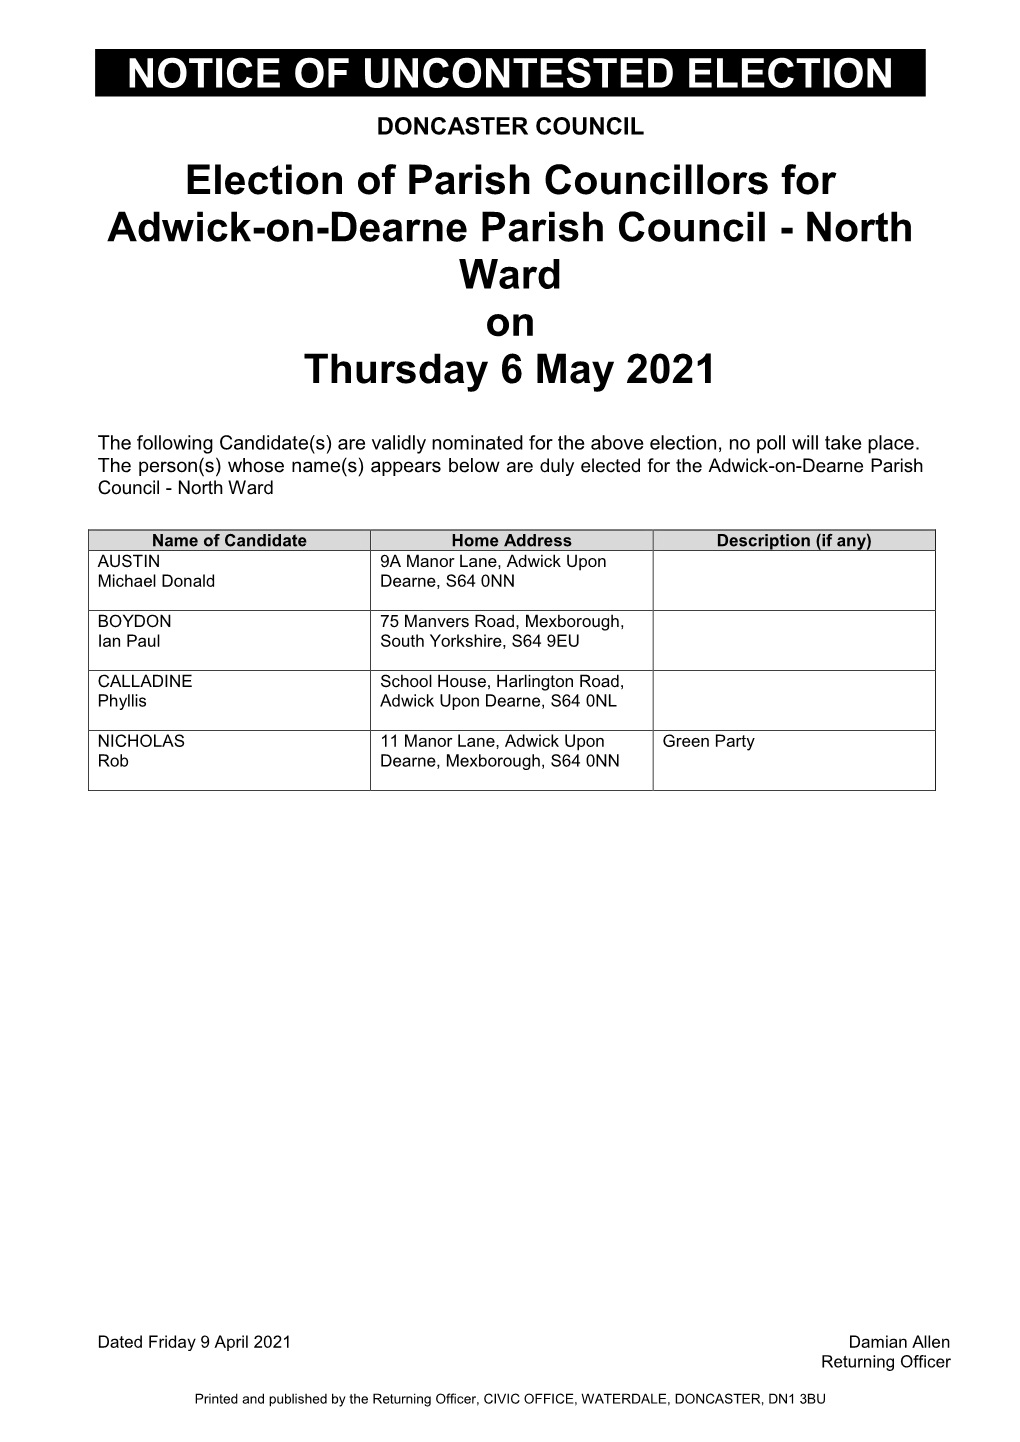 NOTICE of UNCONTESTED ELECTION Election of Parish Councillors for Adwick-On-Dearne Parish Council